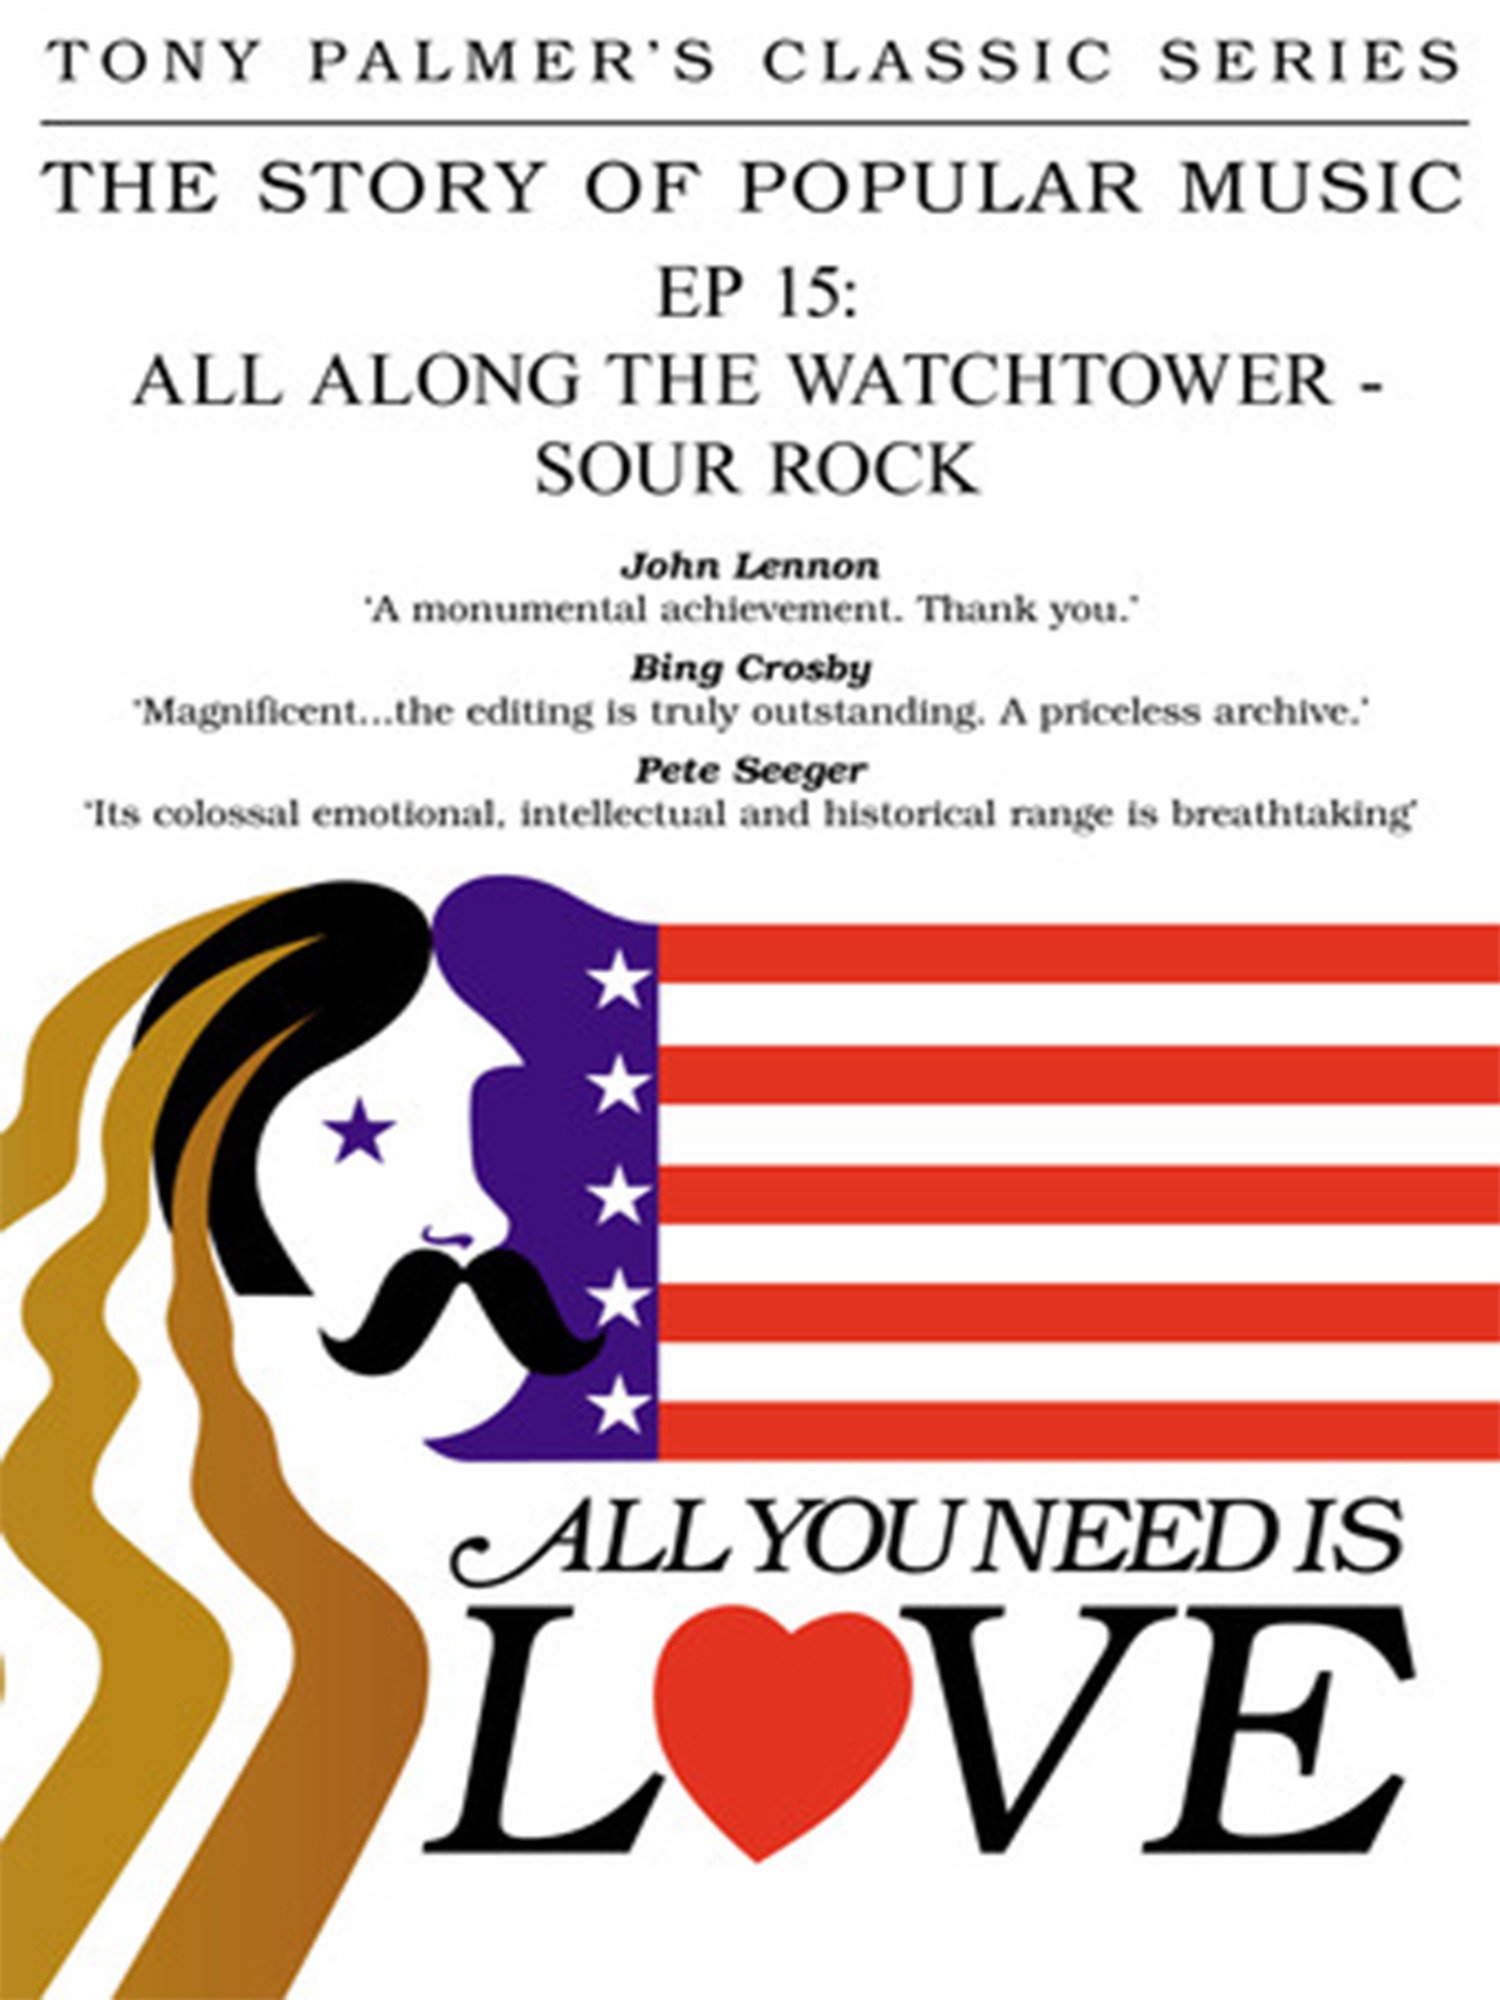 Caratula de All you need is love: All along the Watchtower (All you need is love: All along the Watchtower) 